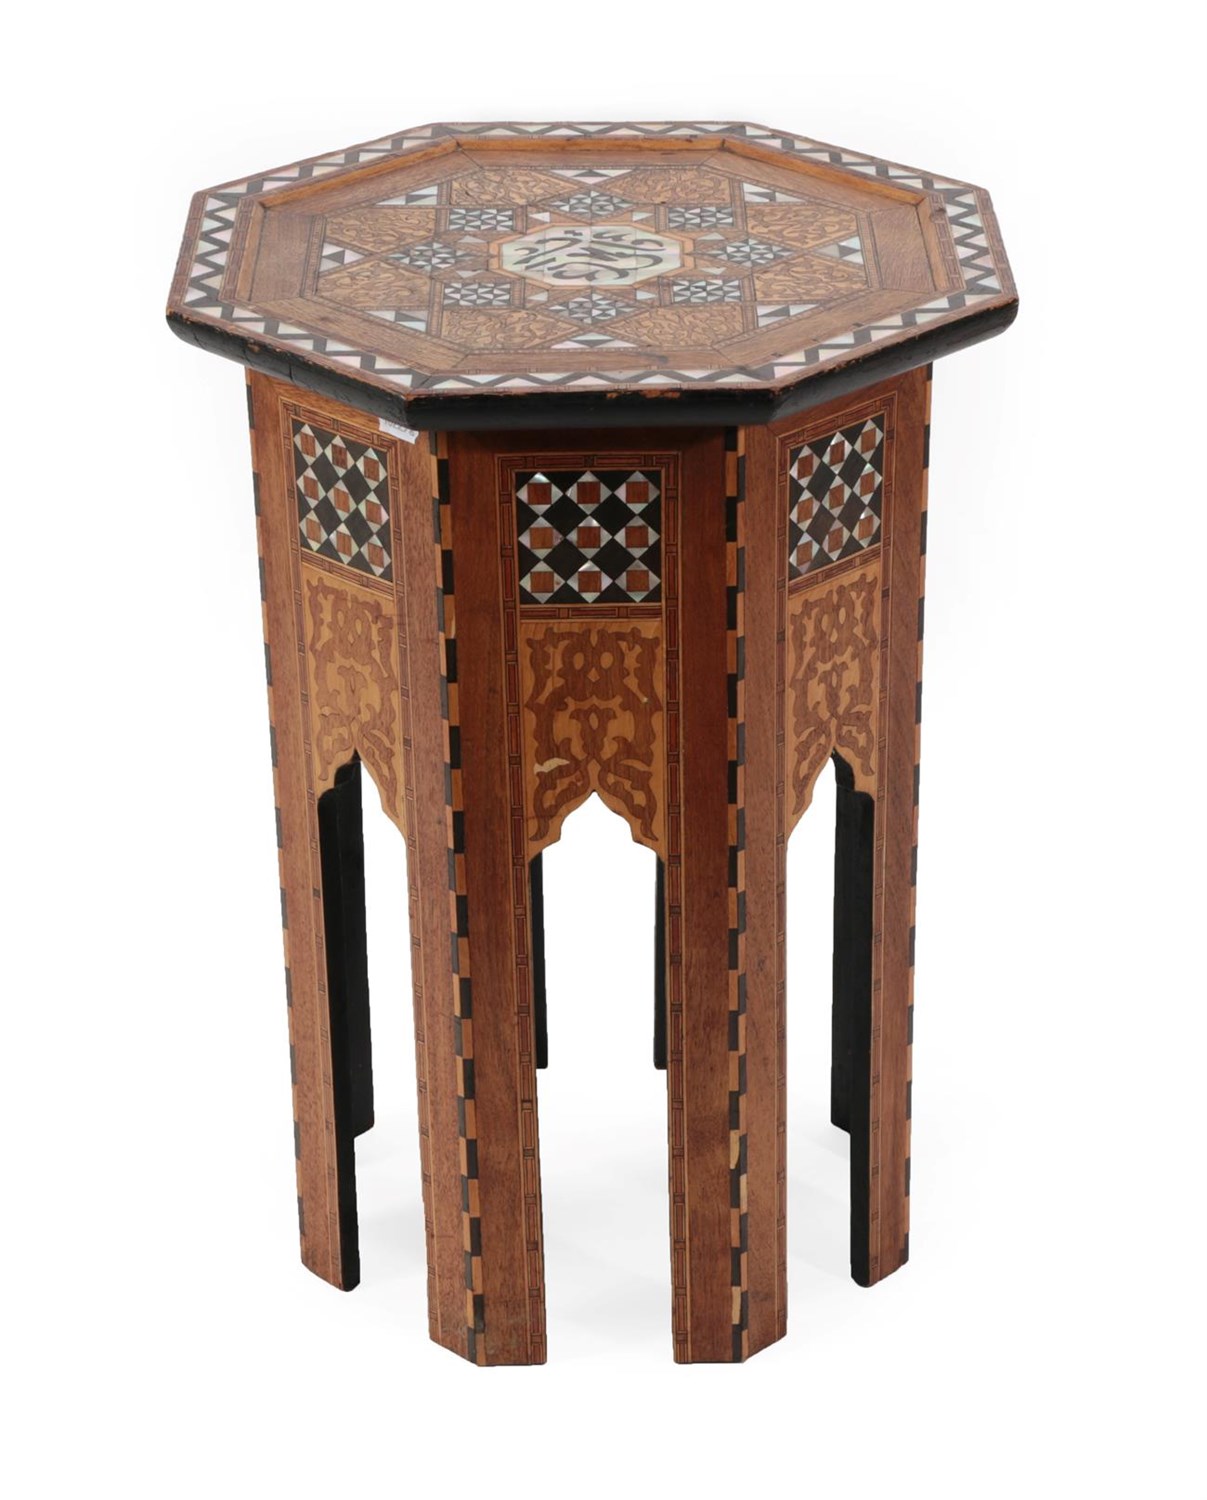 Lot 174 - A Damascus Mother-of-Pearl Inlaid and Marquetry Occasional Table, late 19th/early 20th century, the